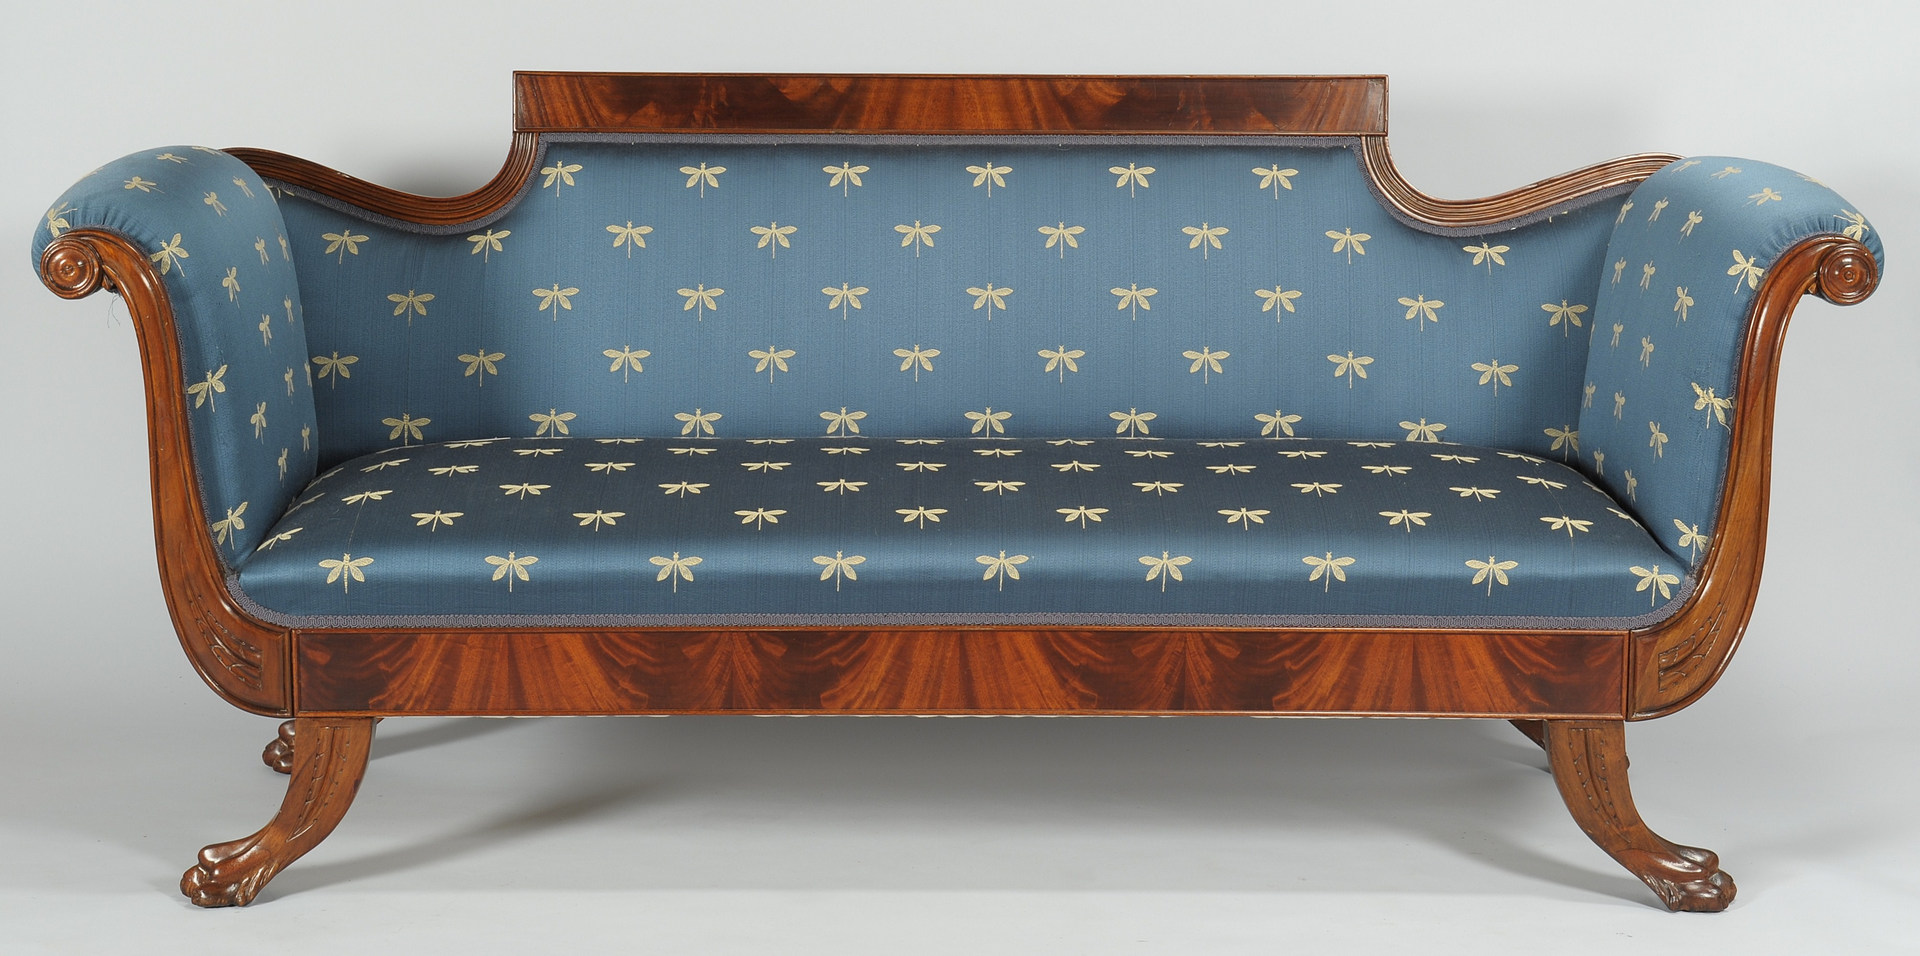 Lot 315: Classical style sofa with dragonfly upholstery